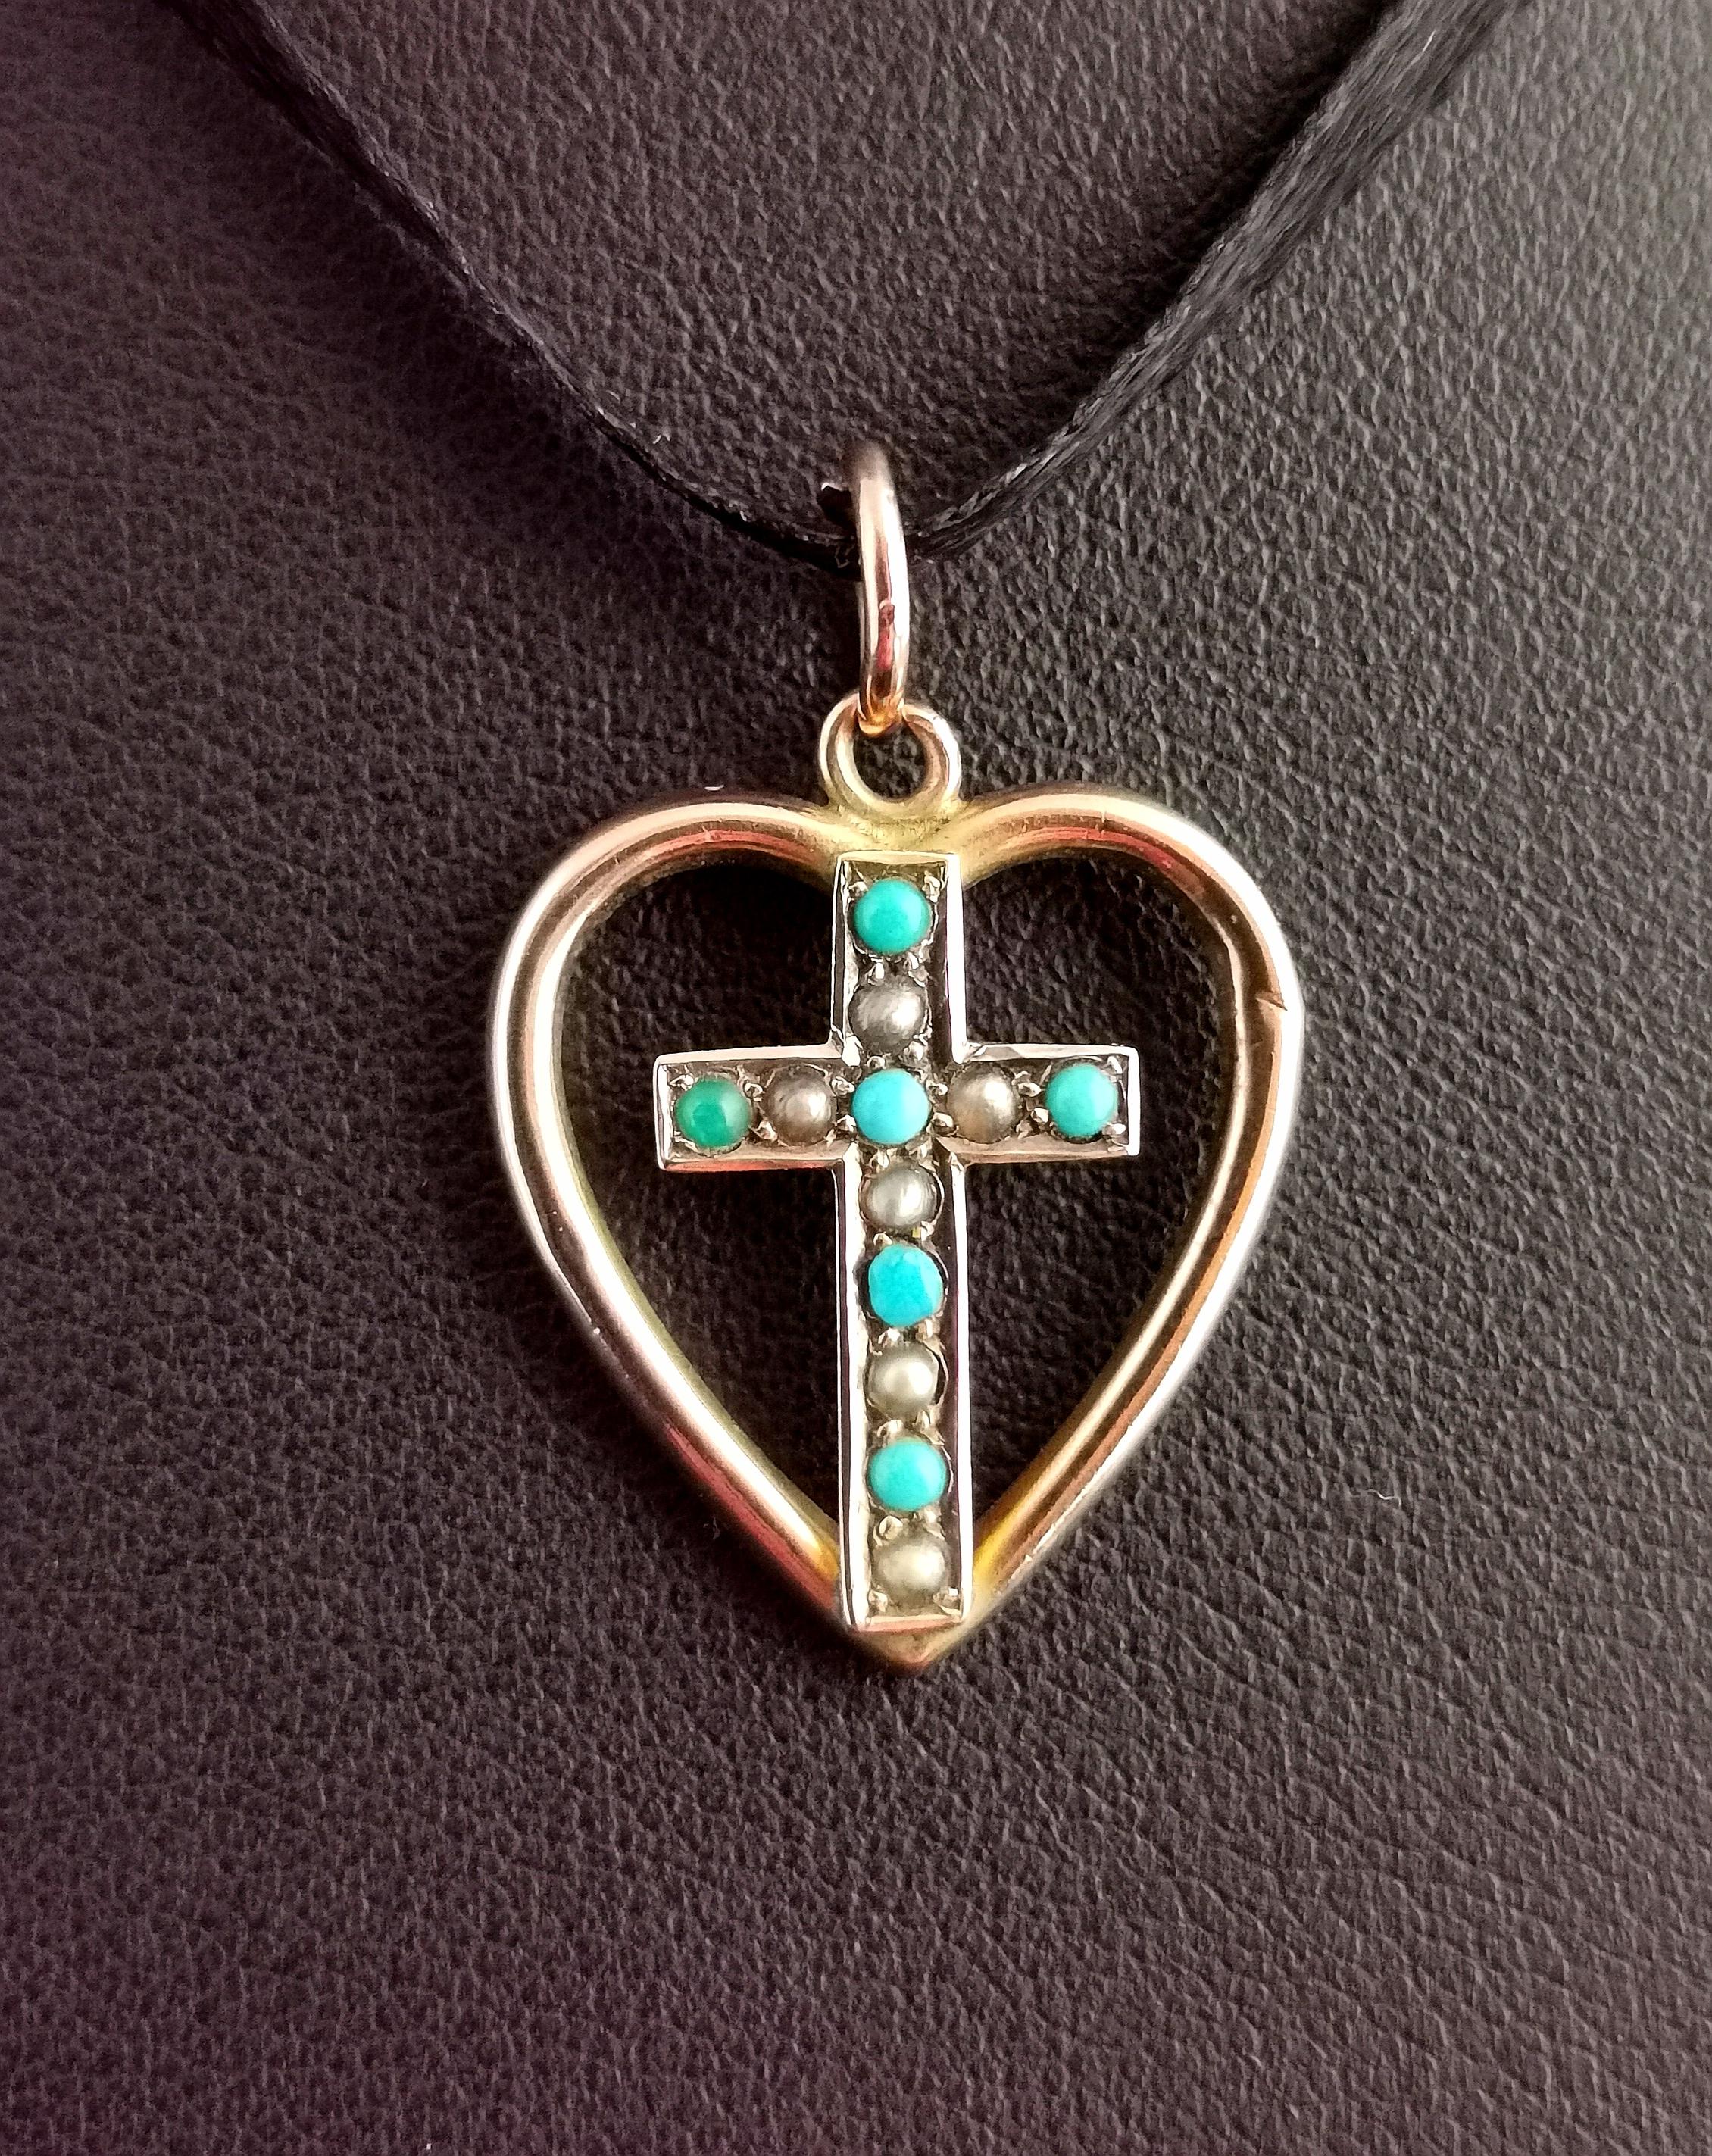 A sweet little antique heart and cross pendant in 9kt Rose gold.

It is a very pretty piece featuring a hollow openwork heart with a cross in the centre of the heart.

The cross is set with turquoise and seed pearl cabochons and the pendant has a